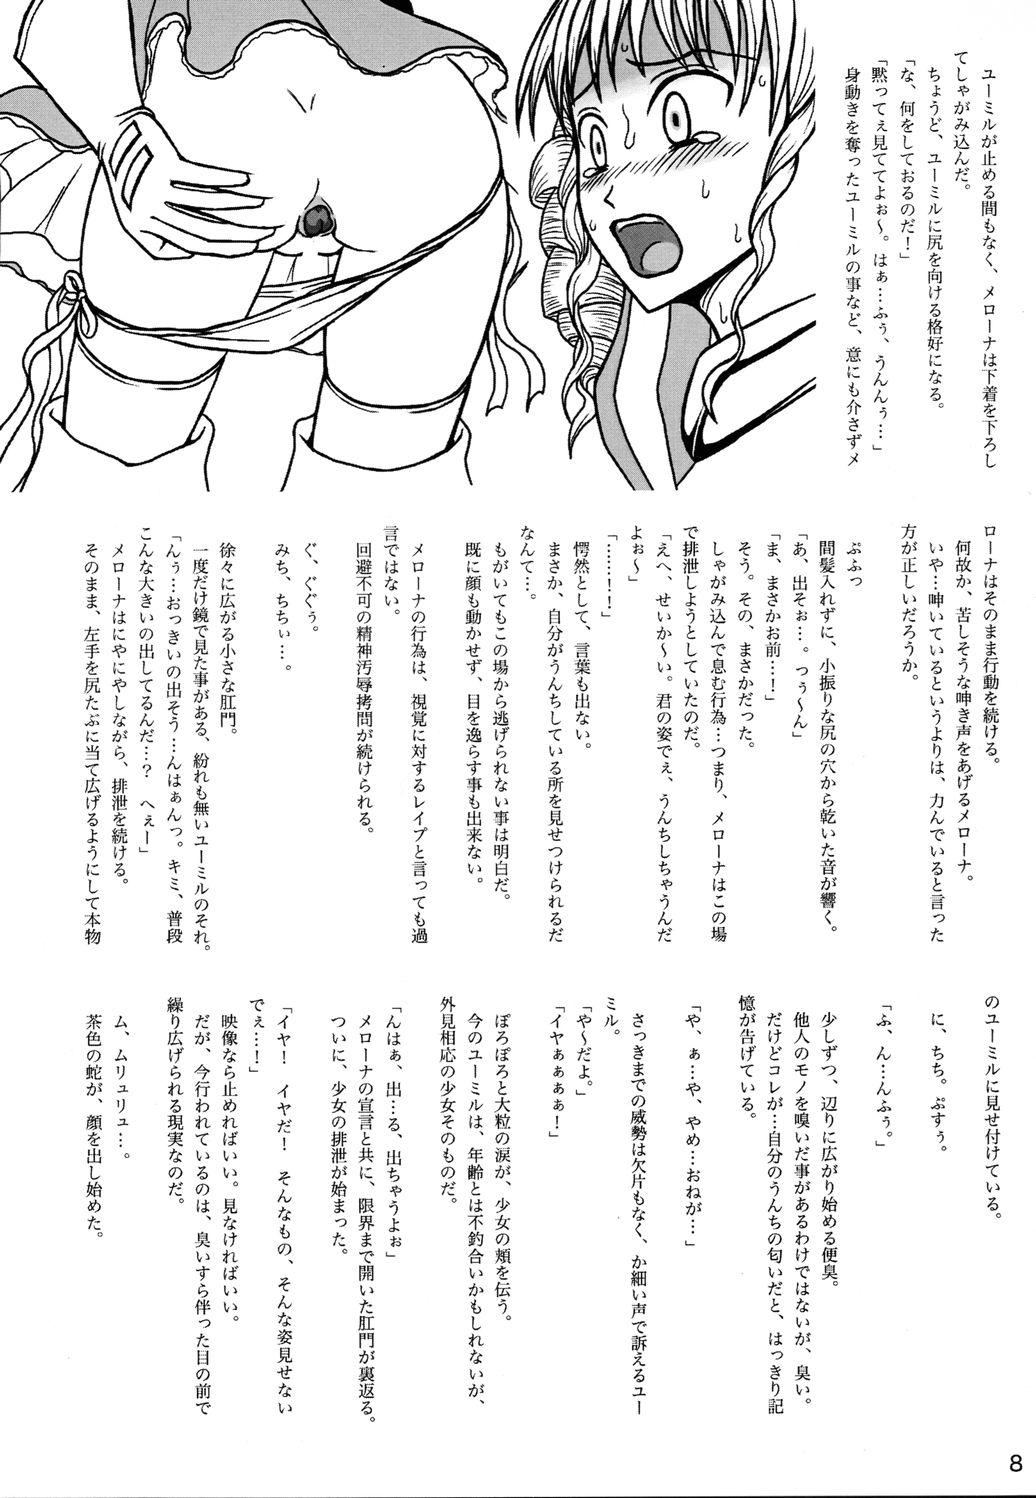 Mulata Queen's Blade Scatology EX - Queens blade Free Fucking - Page 7